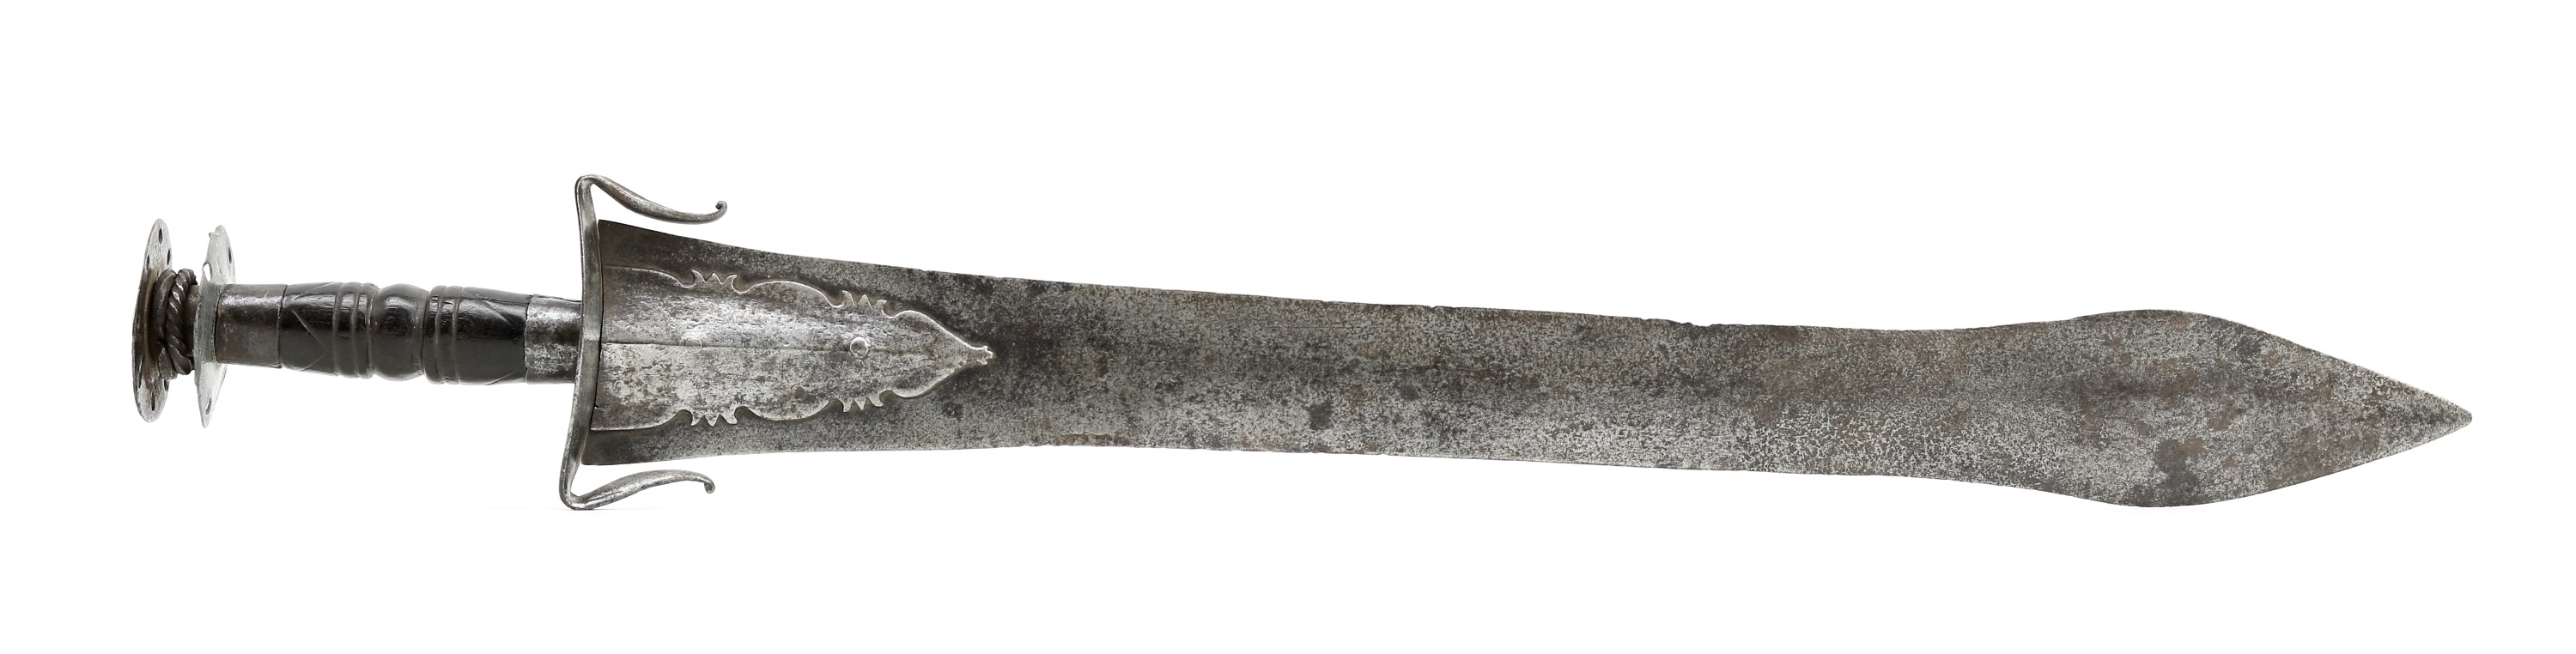 South Indian sword